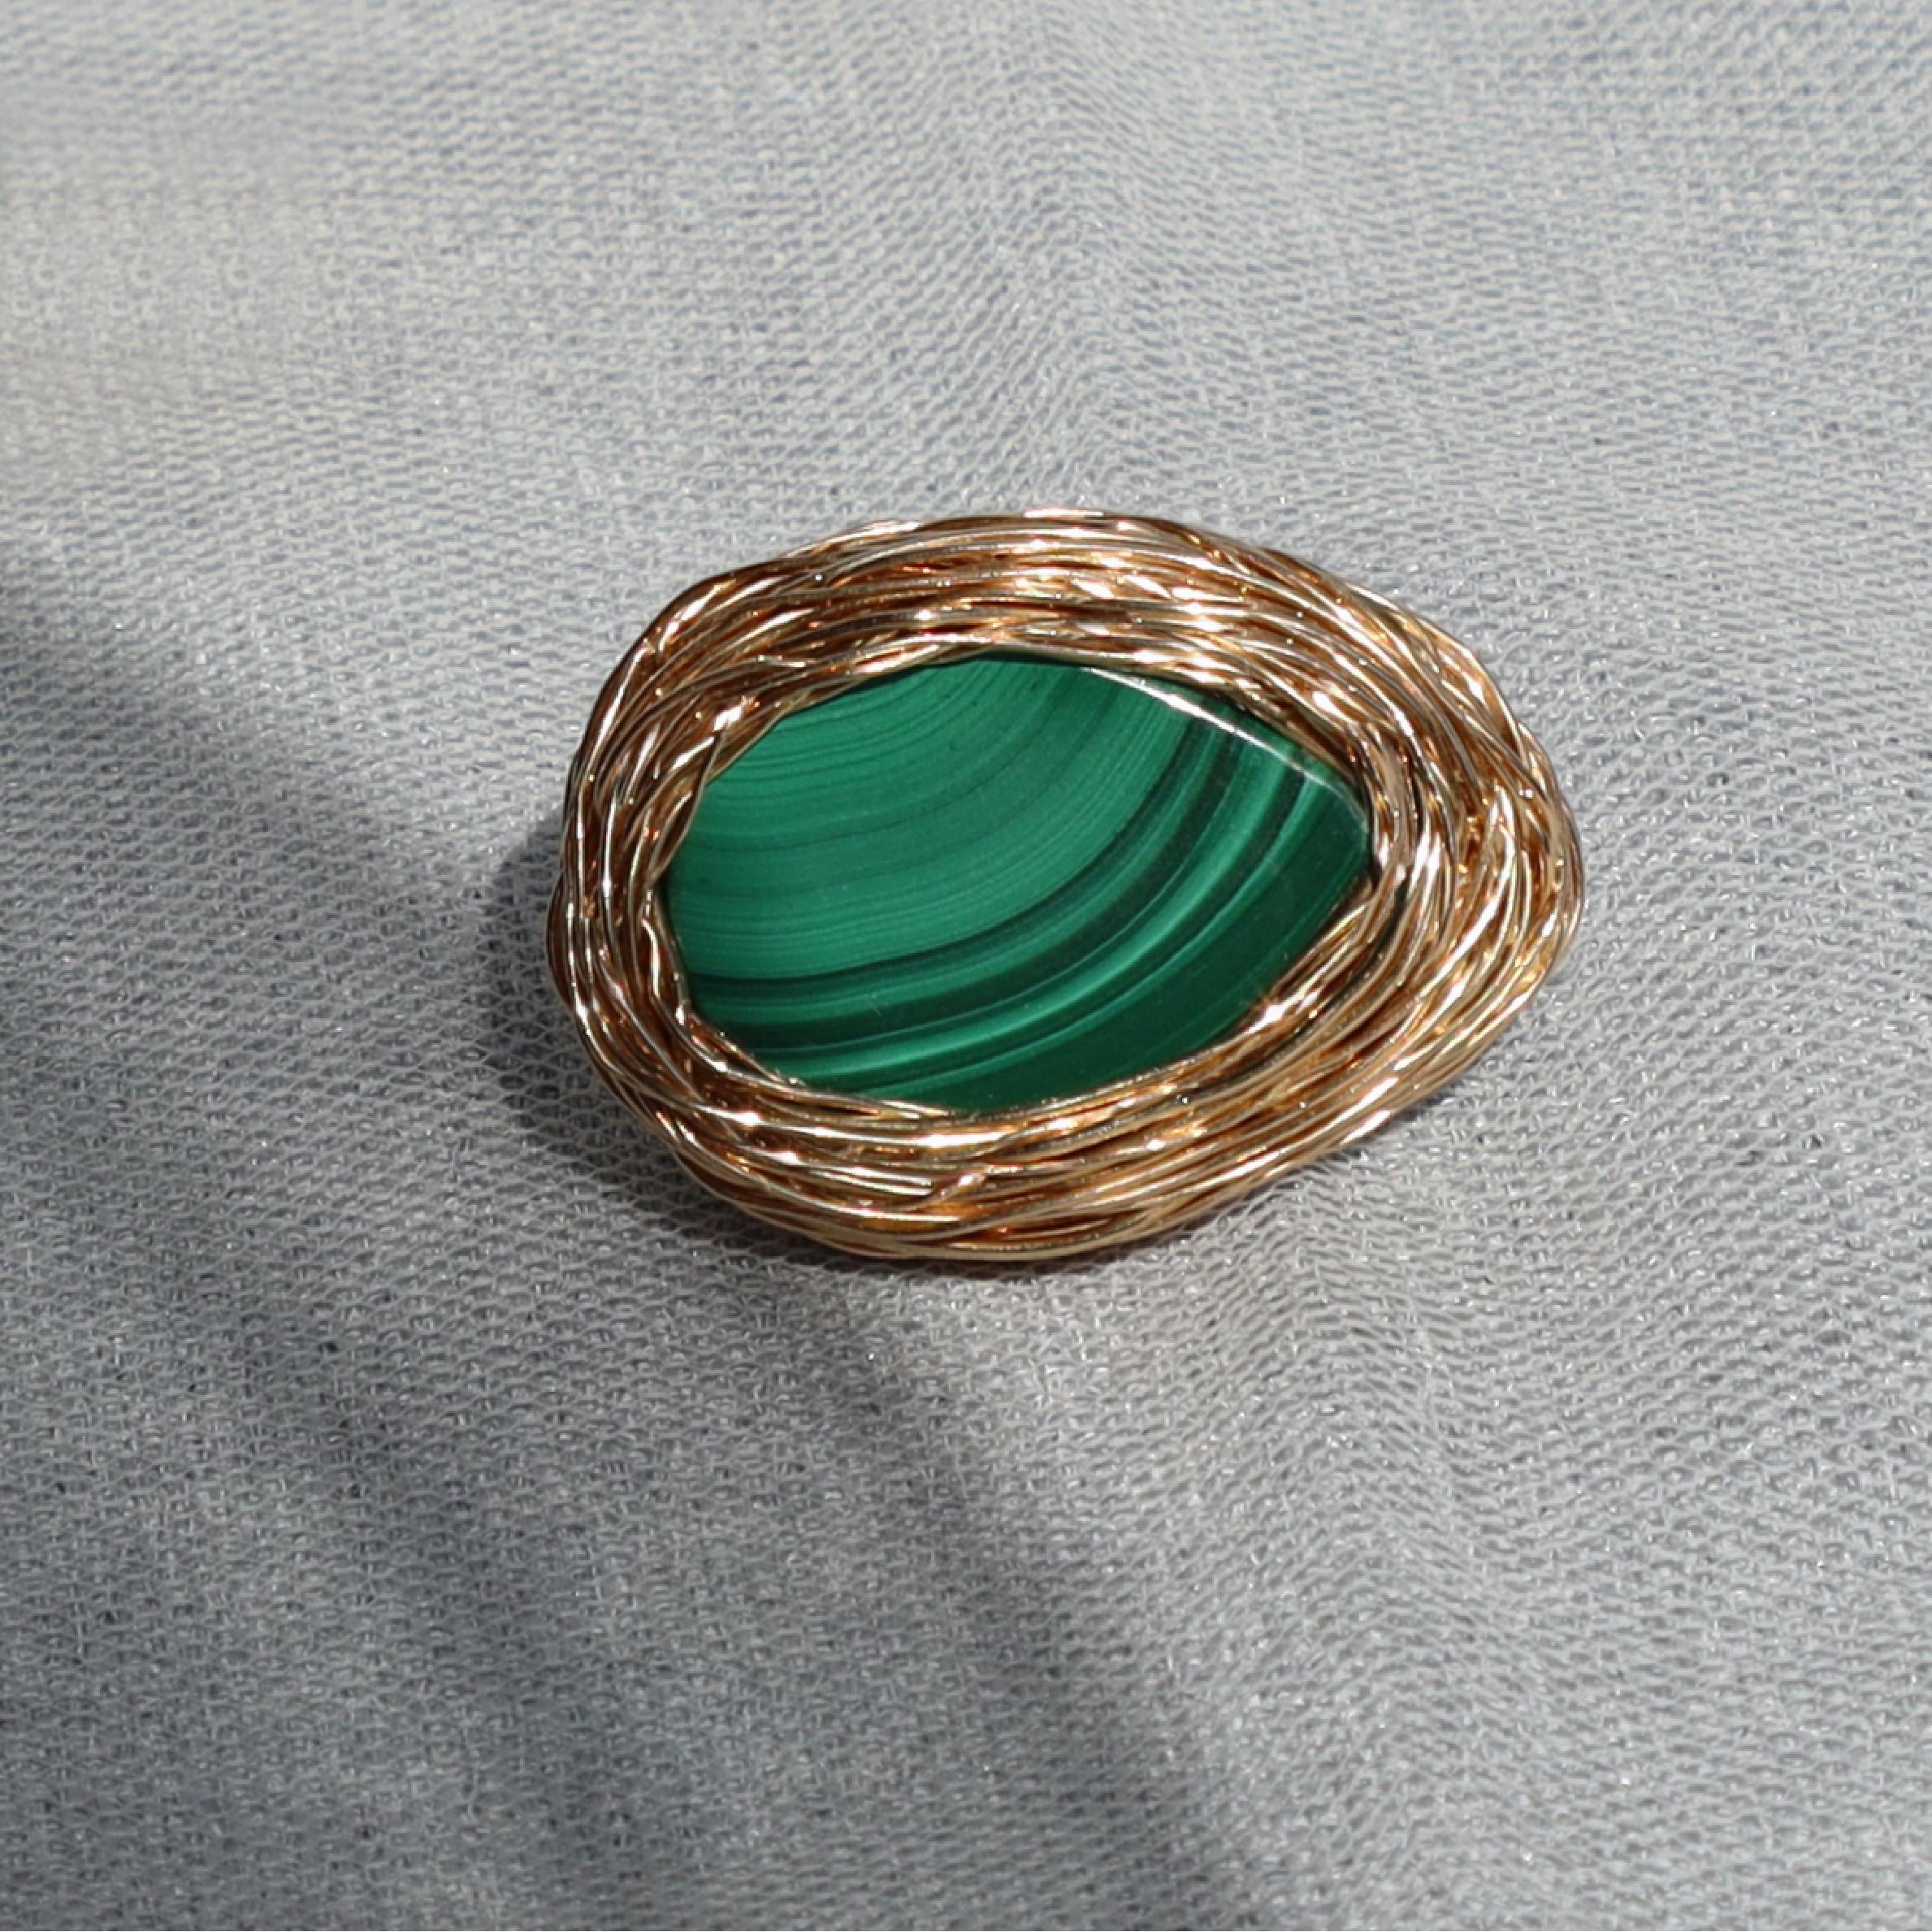 Malachite Drop Shaped Embrace Cocktail Ring in 14 K Yellow Gold F. by the Artist For Sale 6